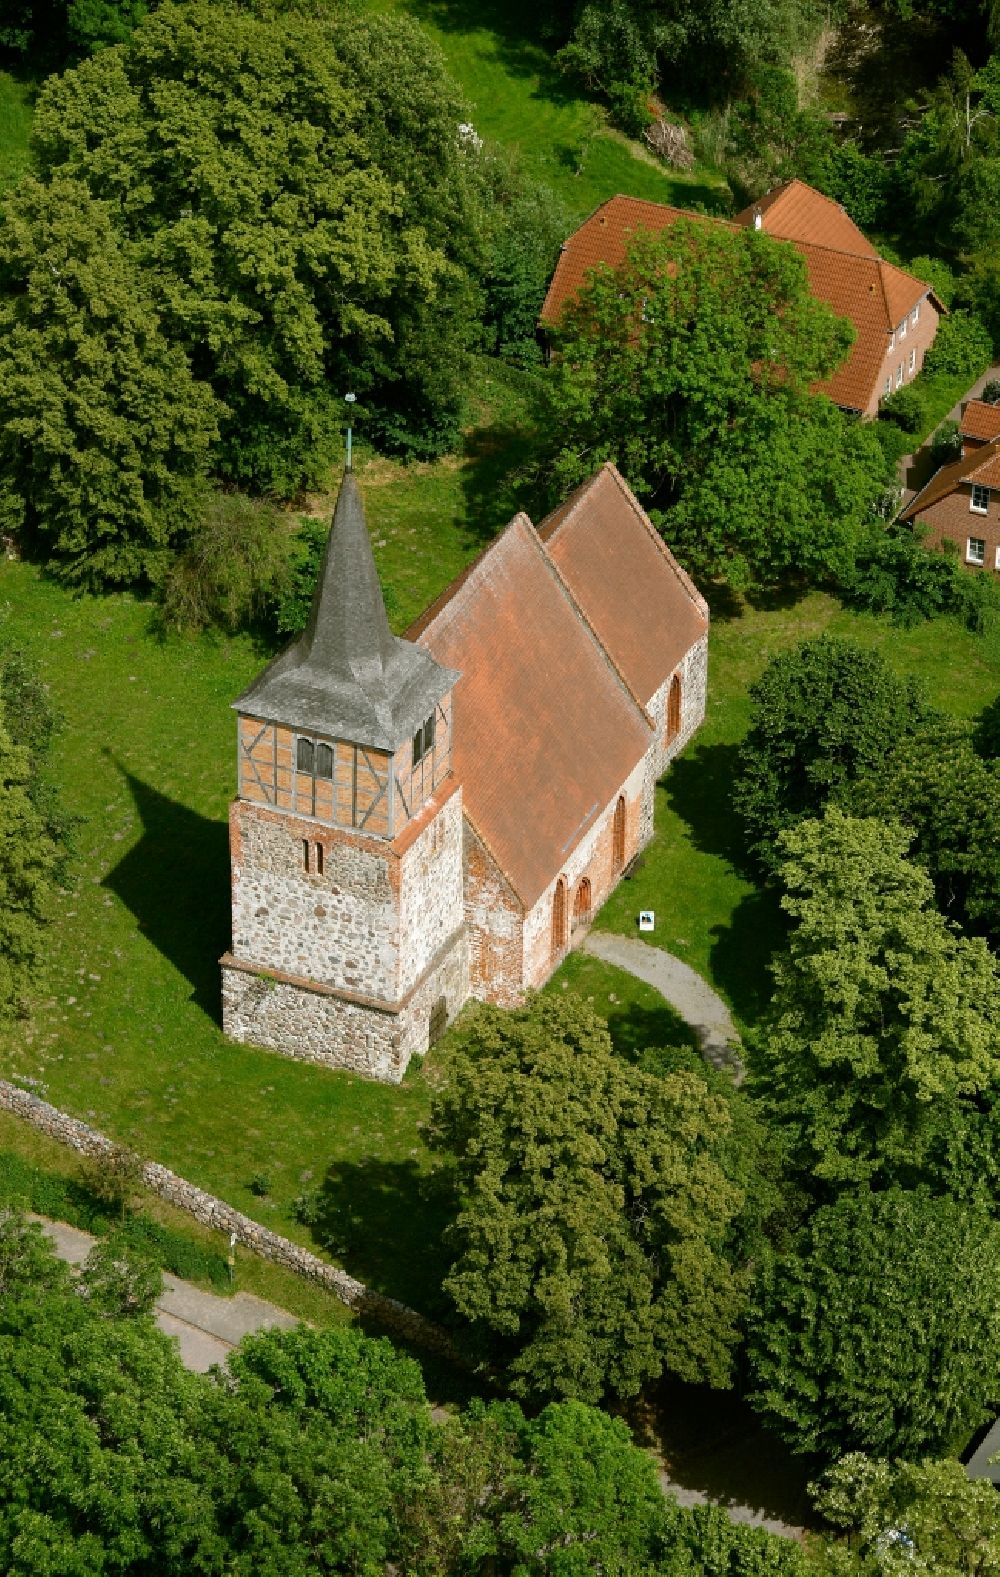 Sietow from the bird's eye view: View of the village church in Sietow (Dorf) in the state of Mecklenburg-Vorpommern. The village church dates from the second half of the 13th century